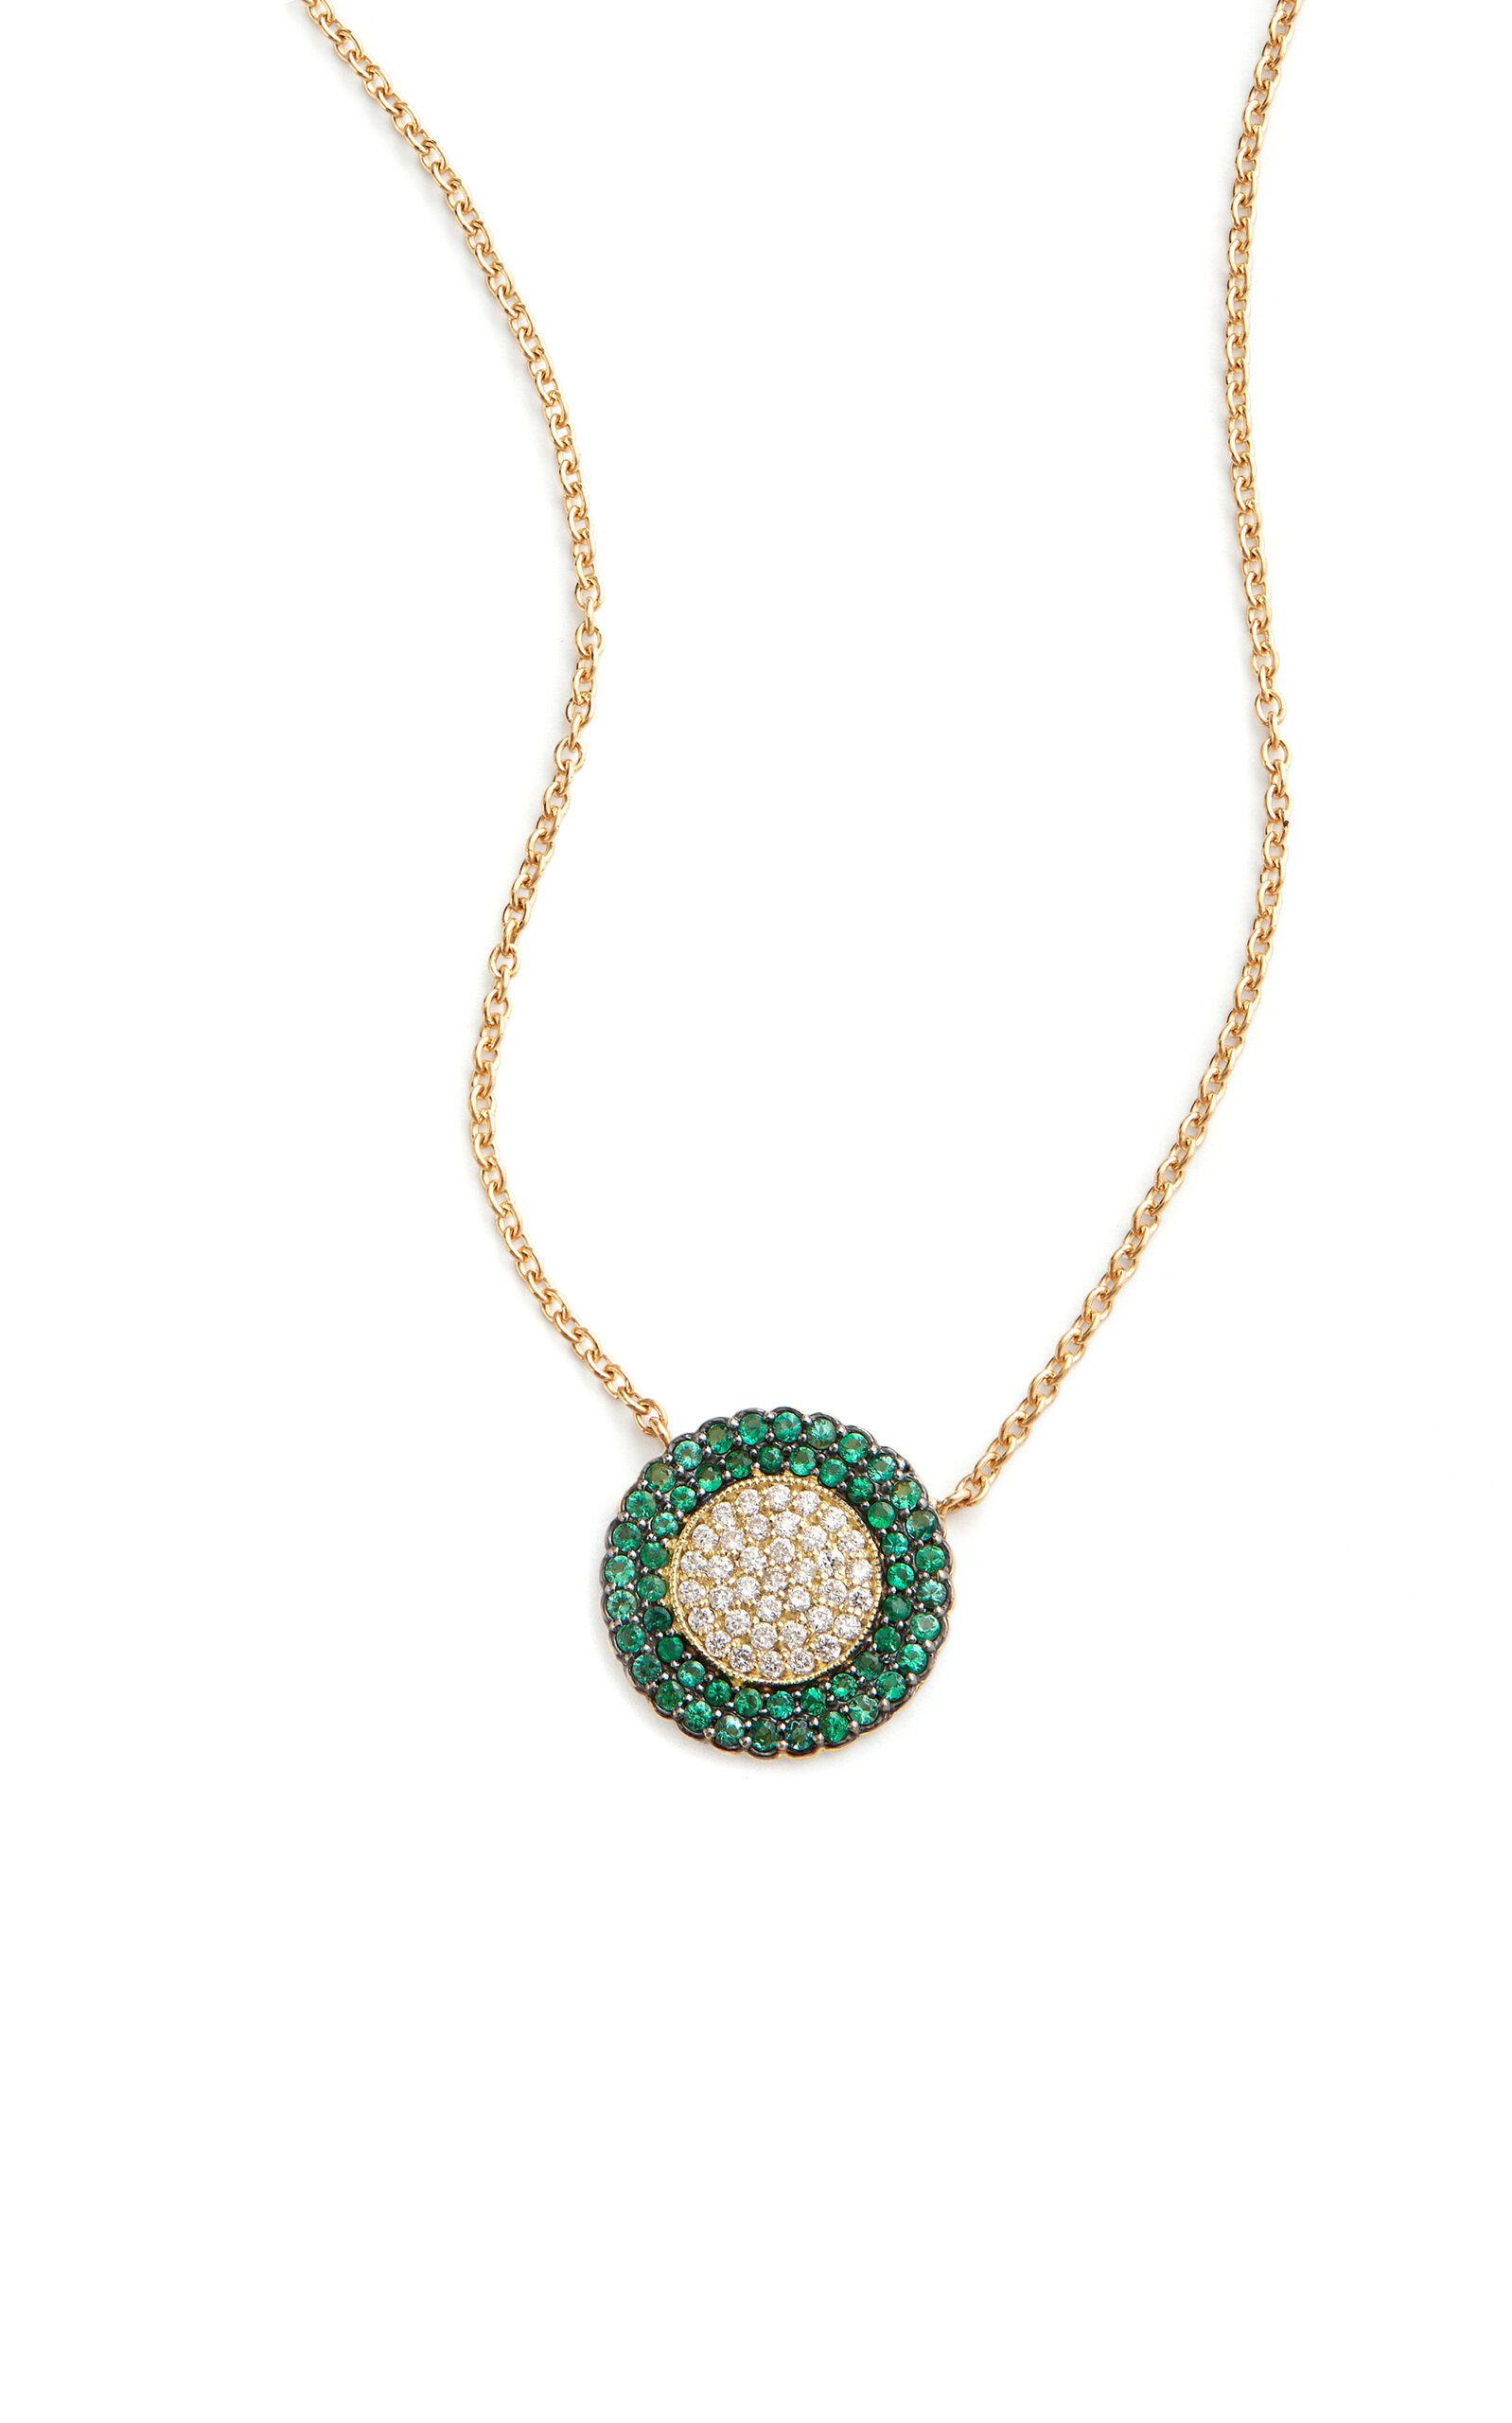 18k Yellow Gold Diamond and Emerald Pendant Necklace